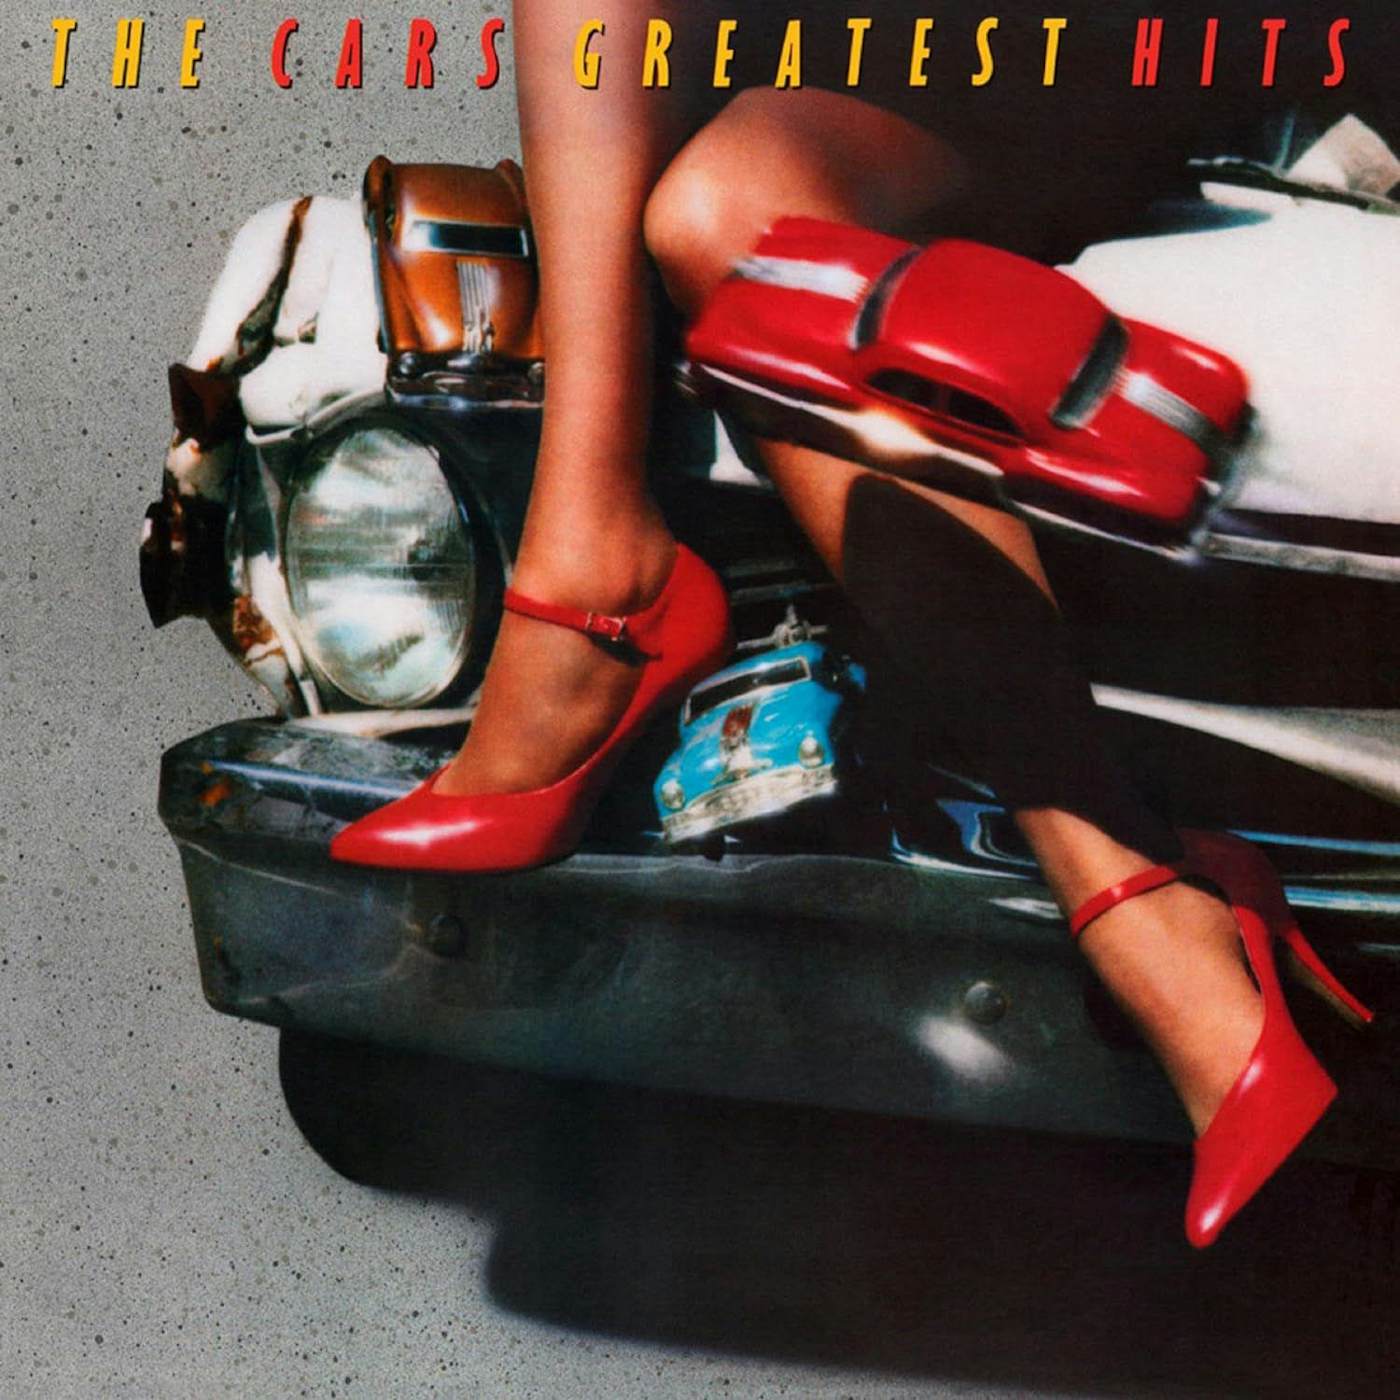 The Cars Greatest Hits Vinyl Record